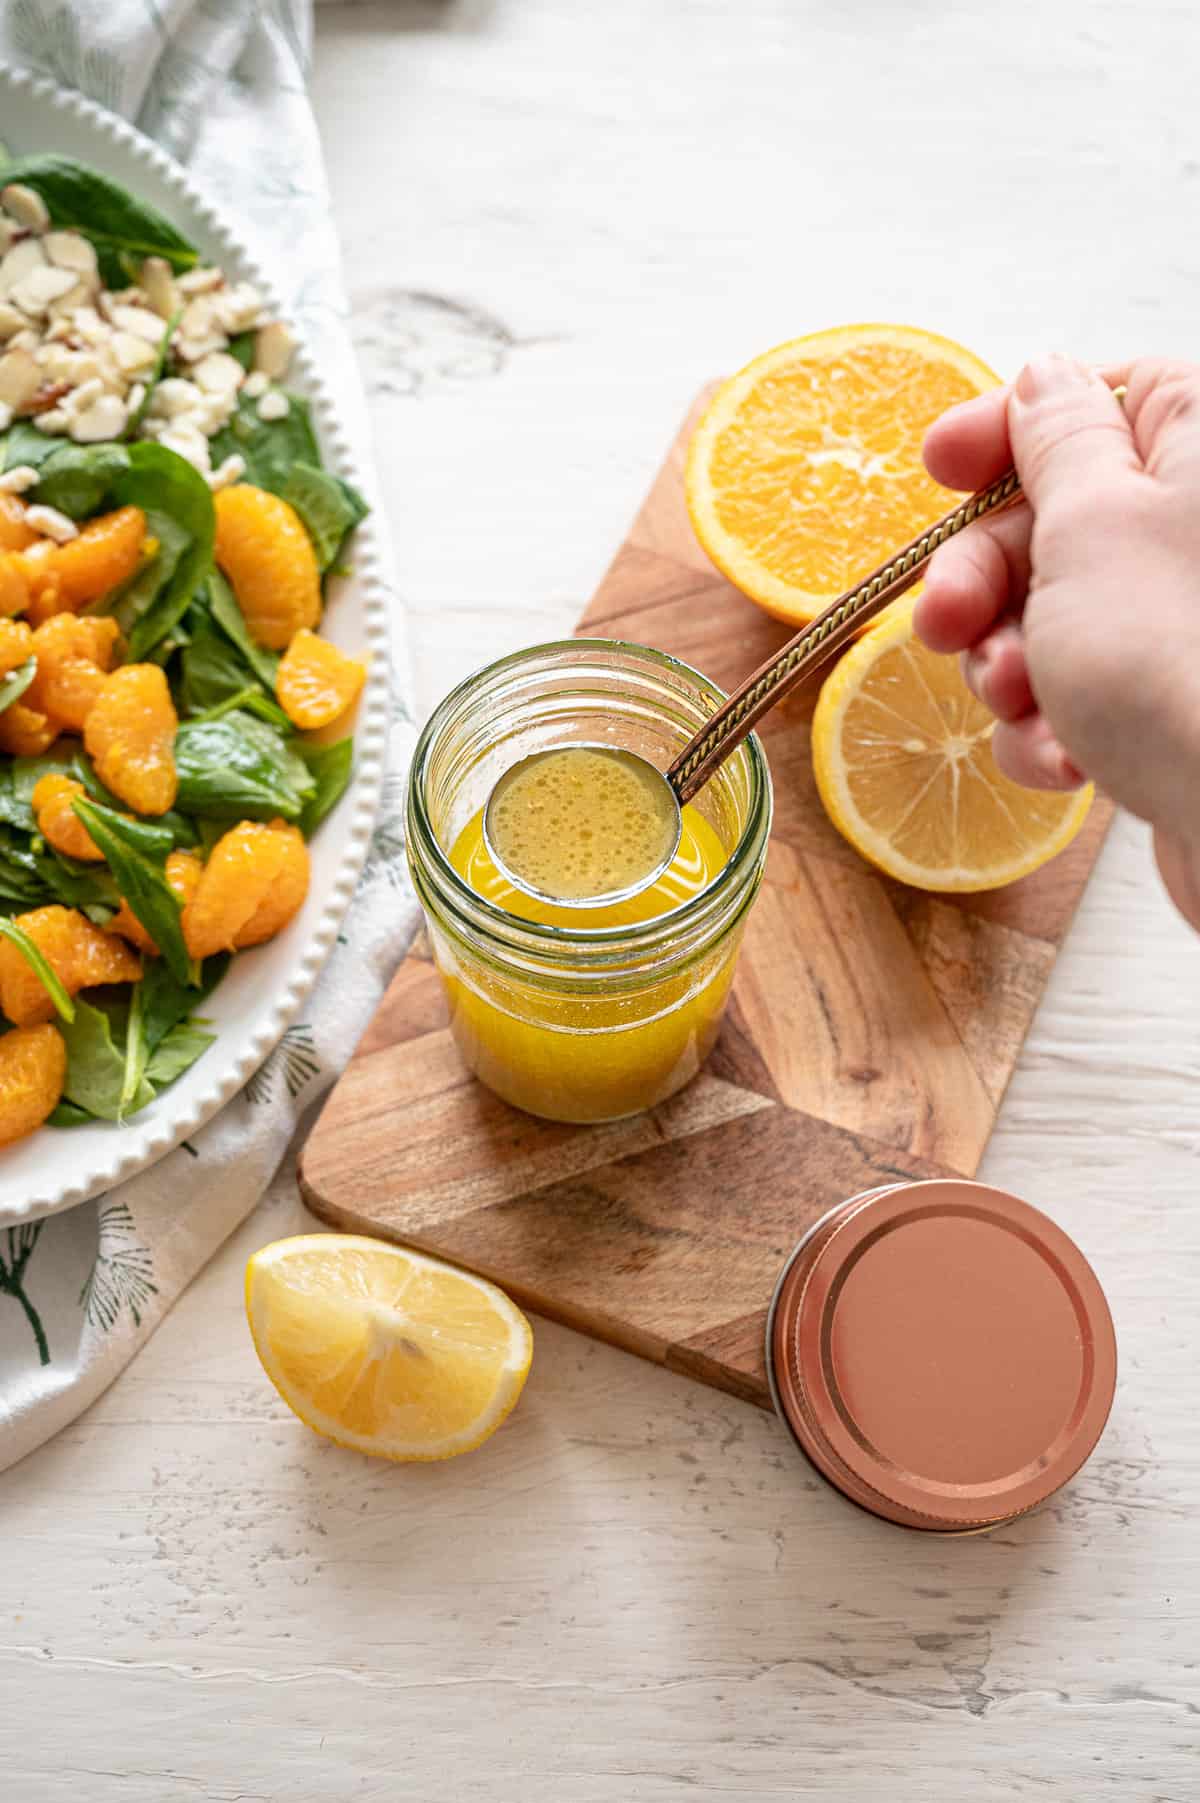 Homemade creamy citrus salad dressing in a small jar being ladled onto a Mandarin orange salad next to it.